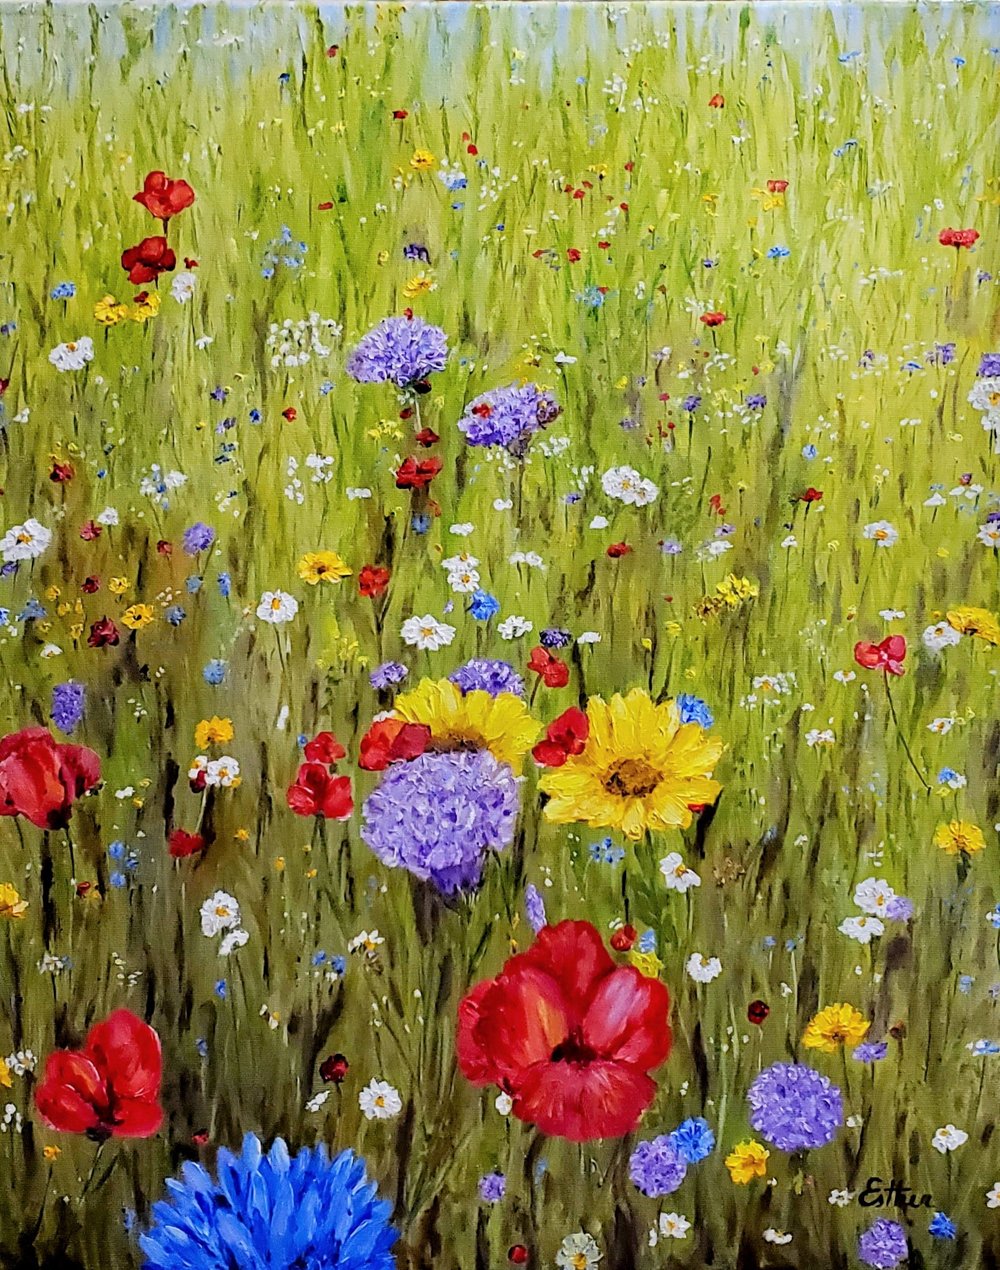 Image of Enchanted Meadow 1 by Esther Scott